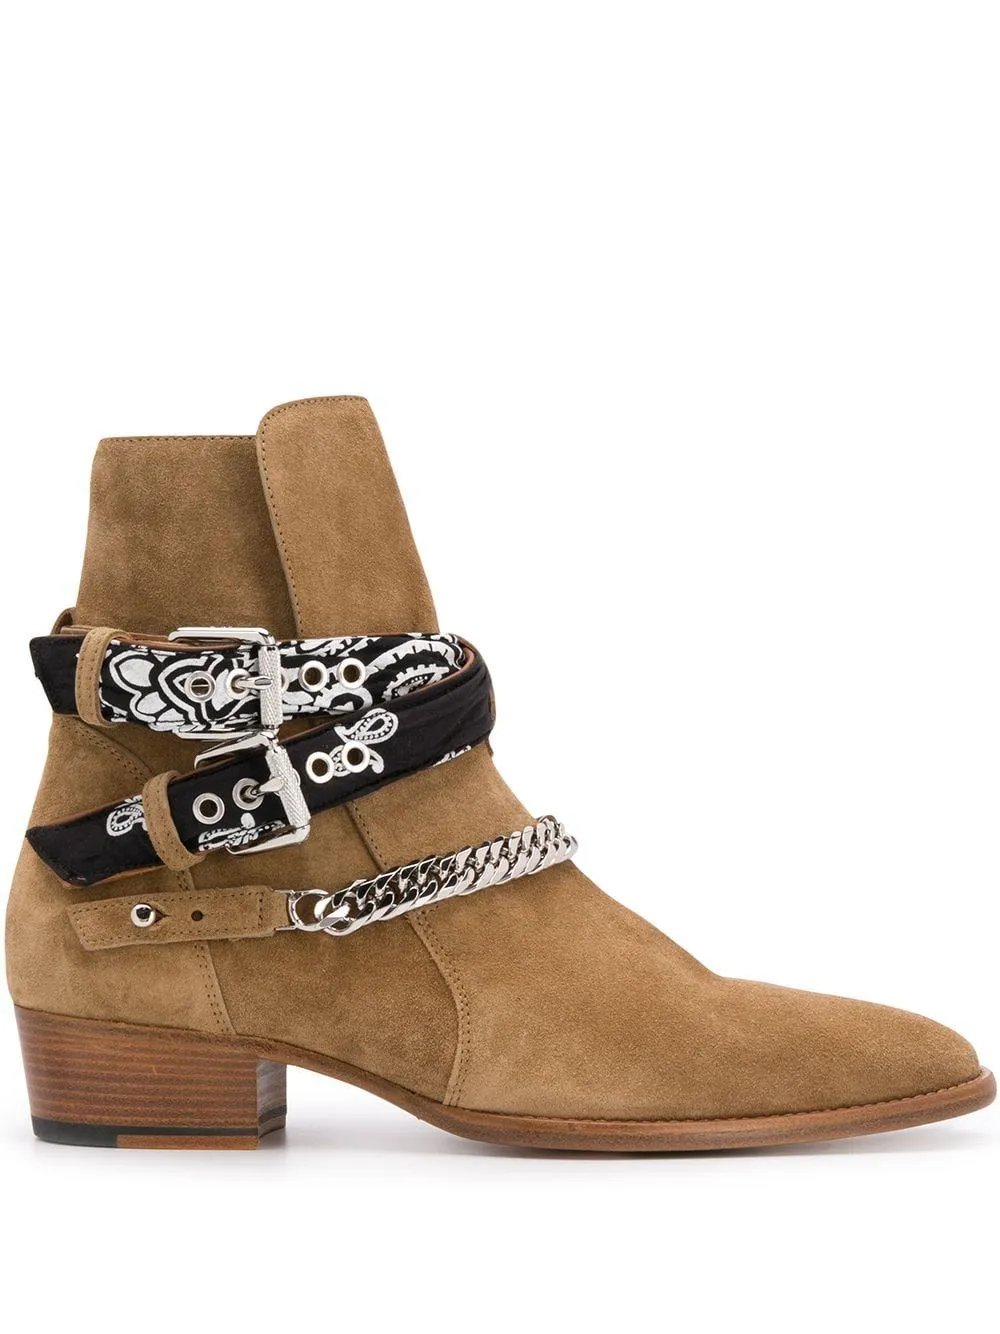 New Season Man  Chain-embellished Ankle Boots Bandana Print Side Buckle Fastening Round Toe Shoes